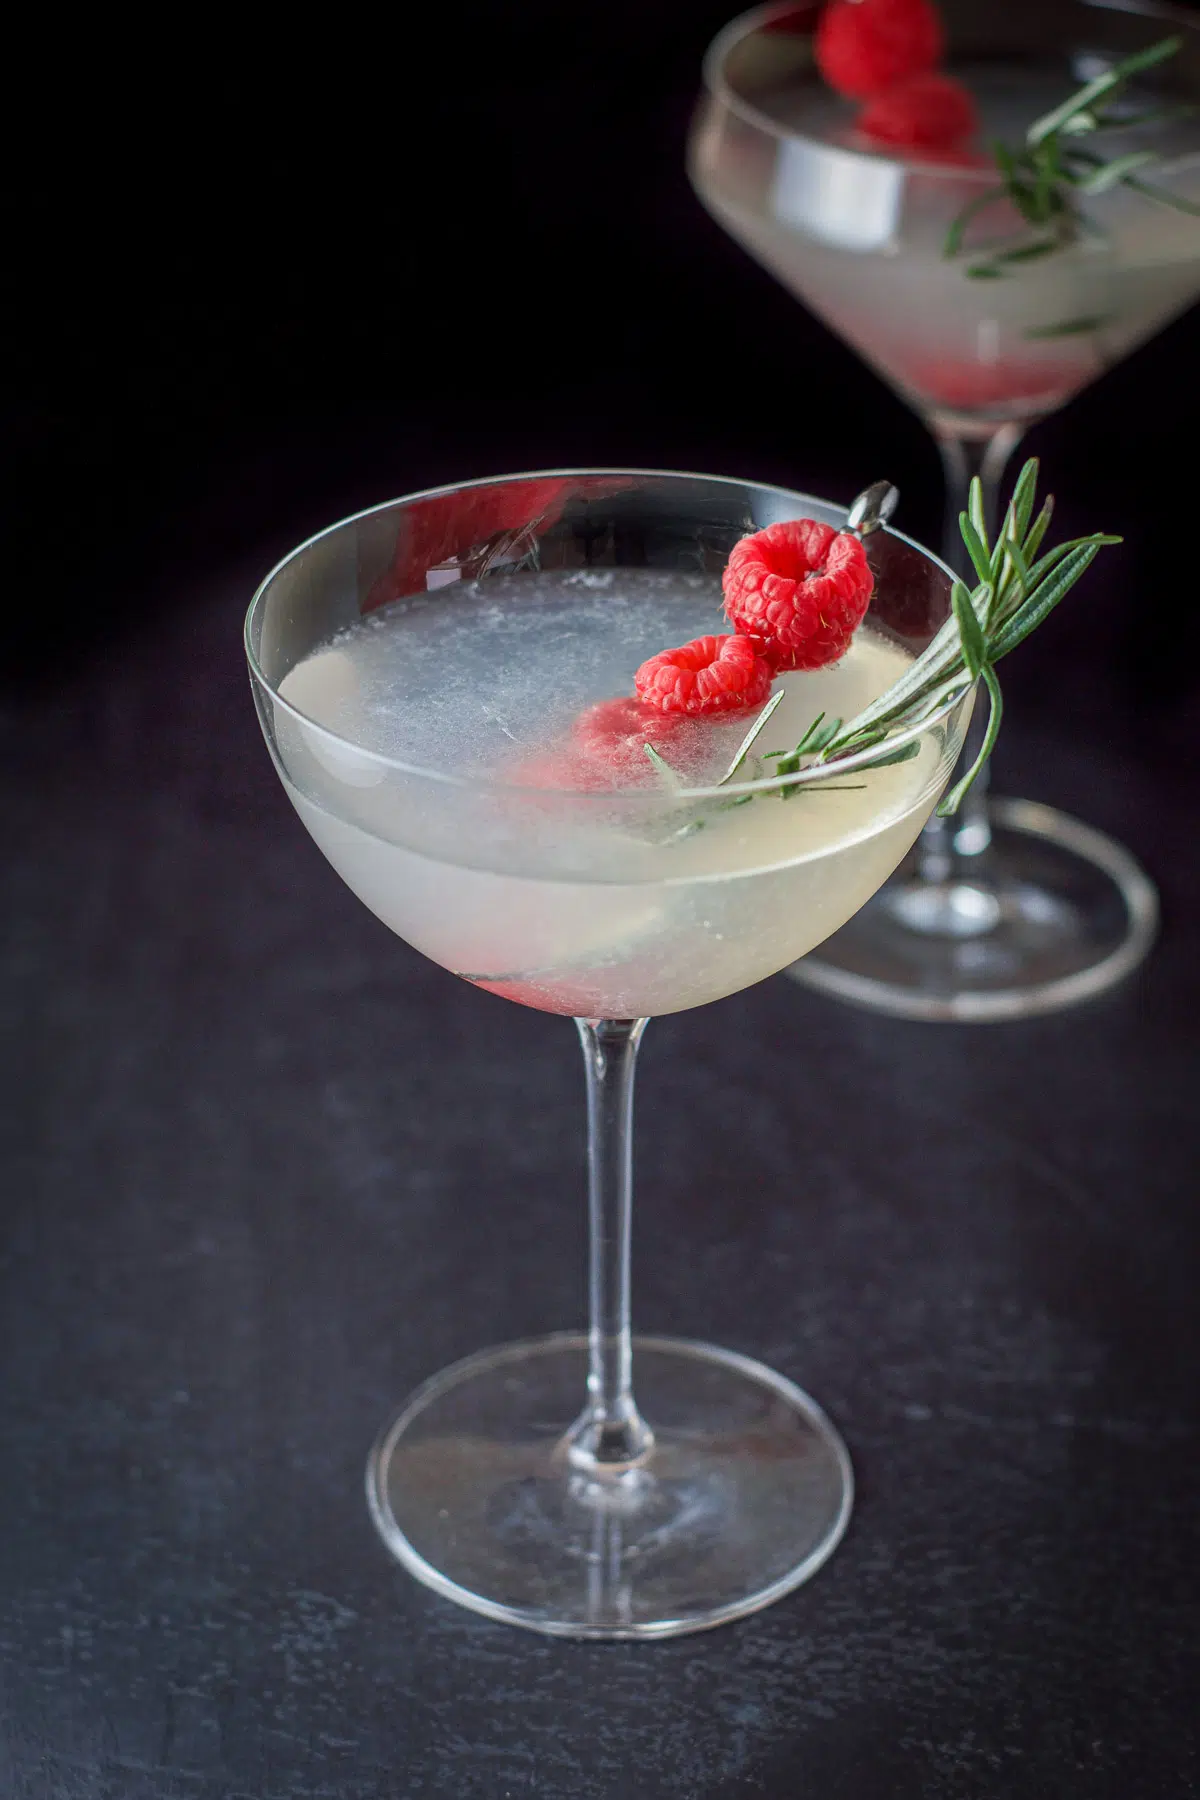 Higher view of the drinks in martini glasses with rosemary and raspberries as garnish